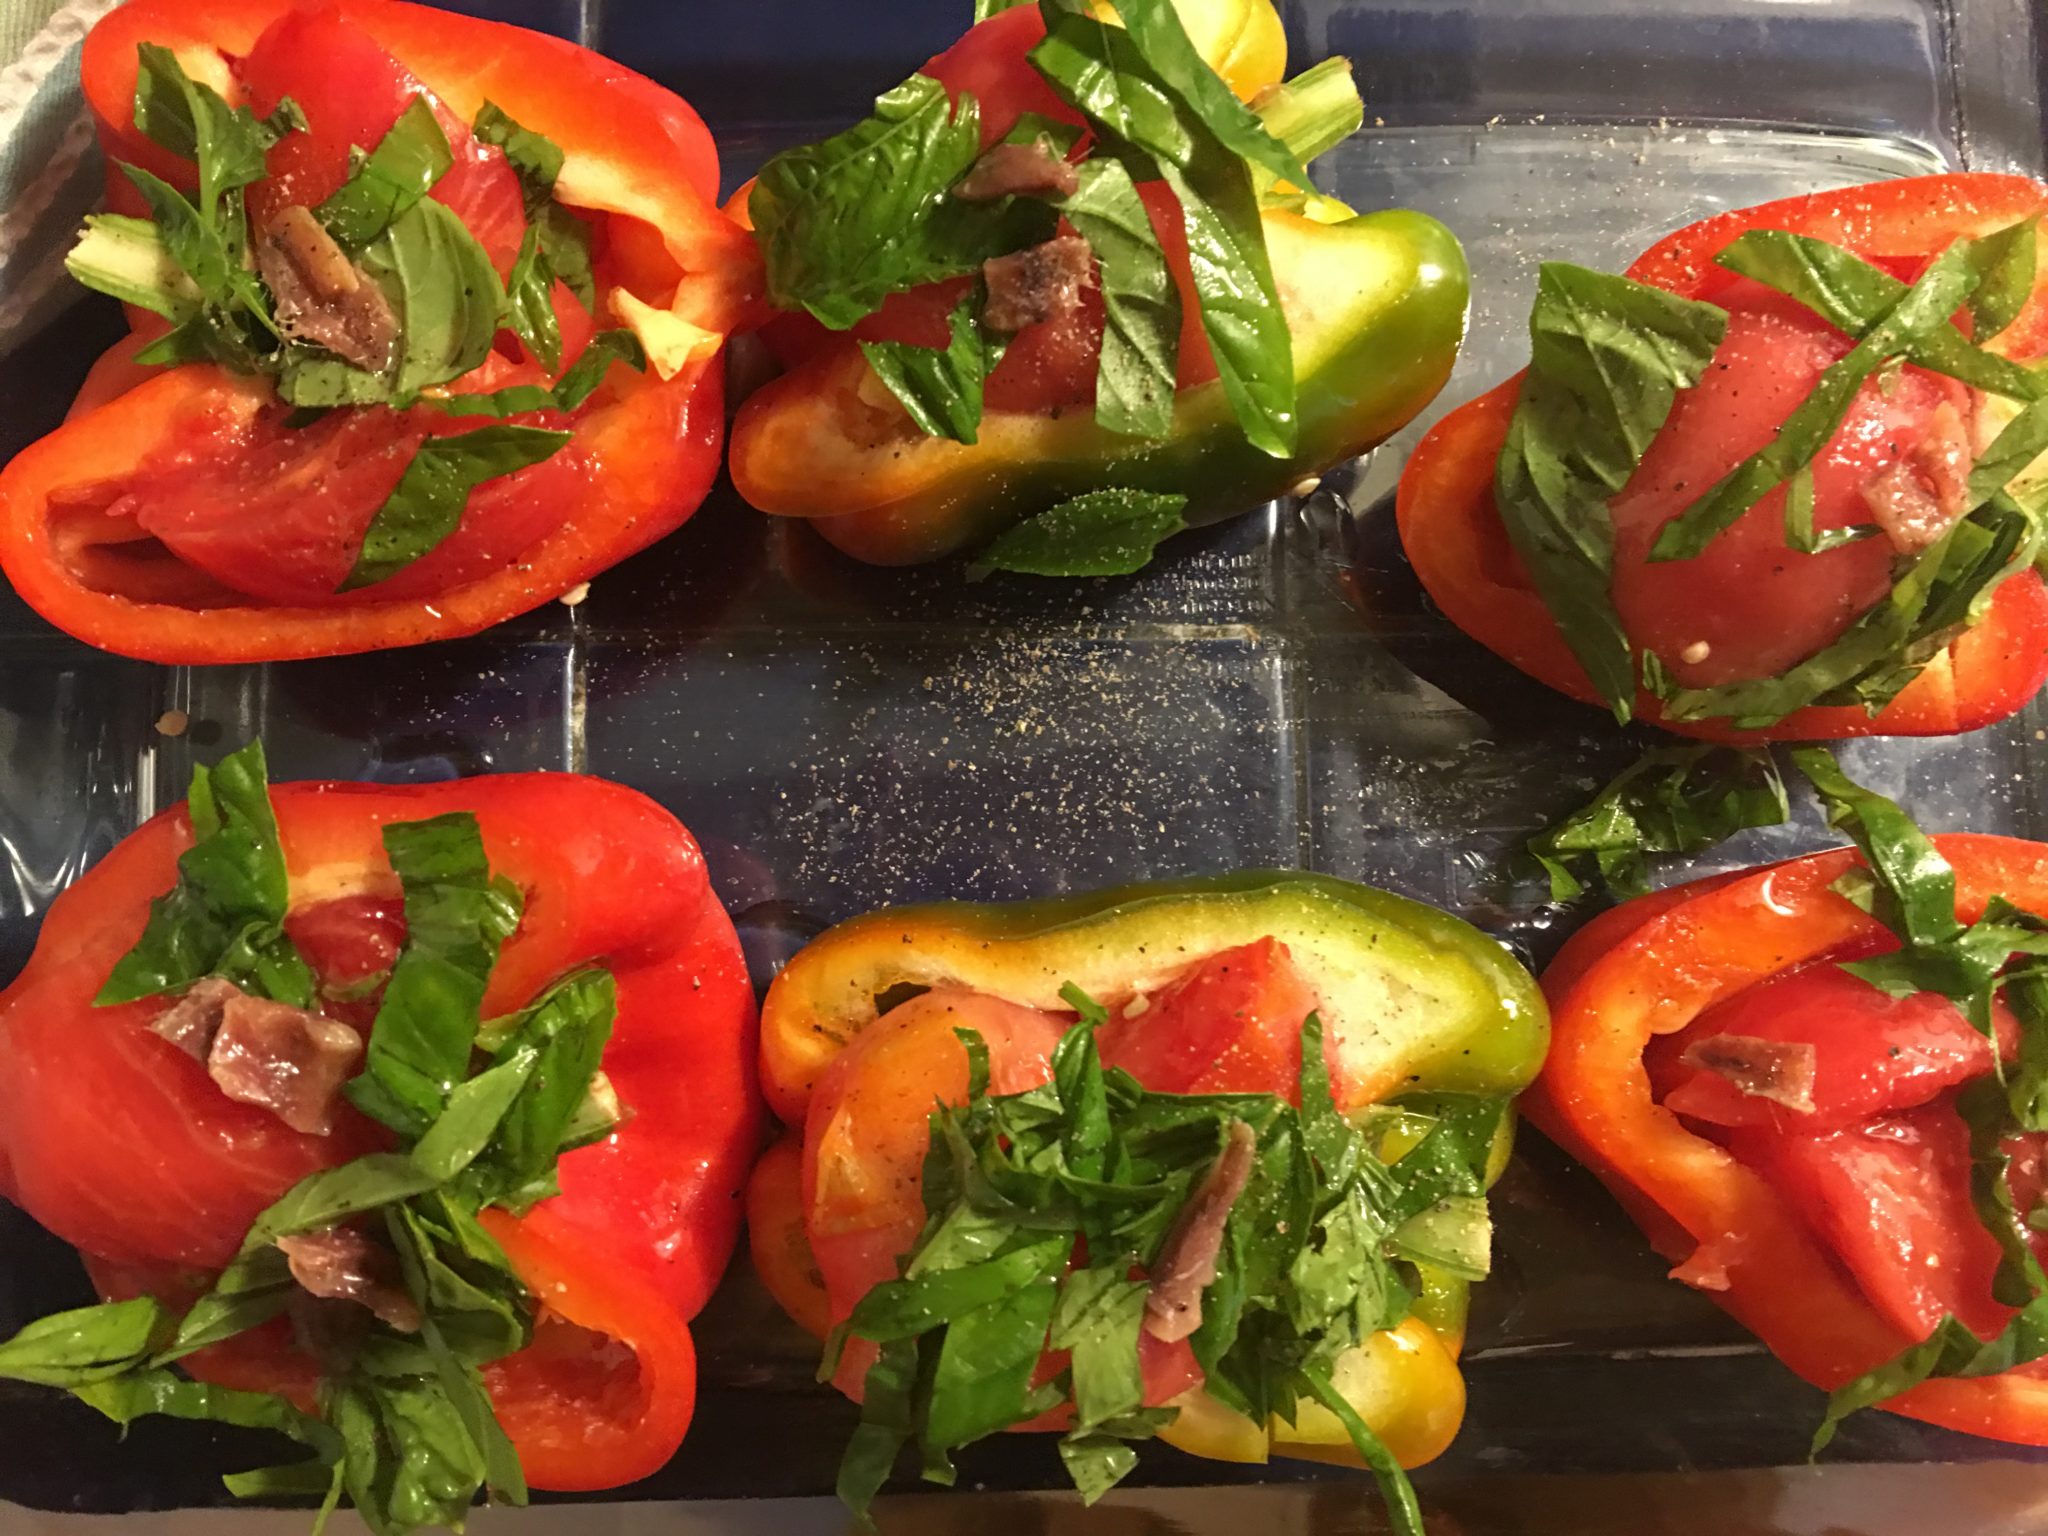 Tomato stuffed peppers prior to cooking